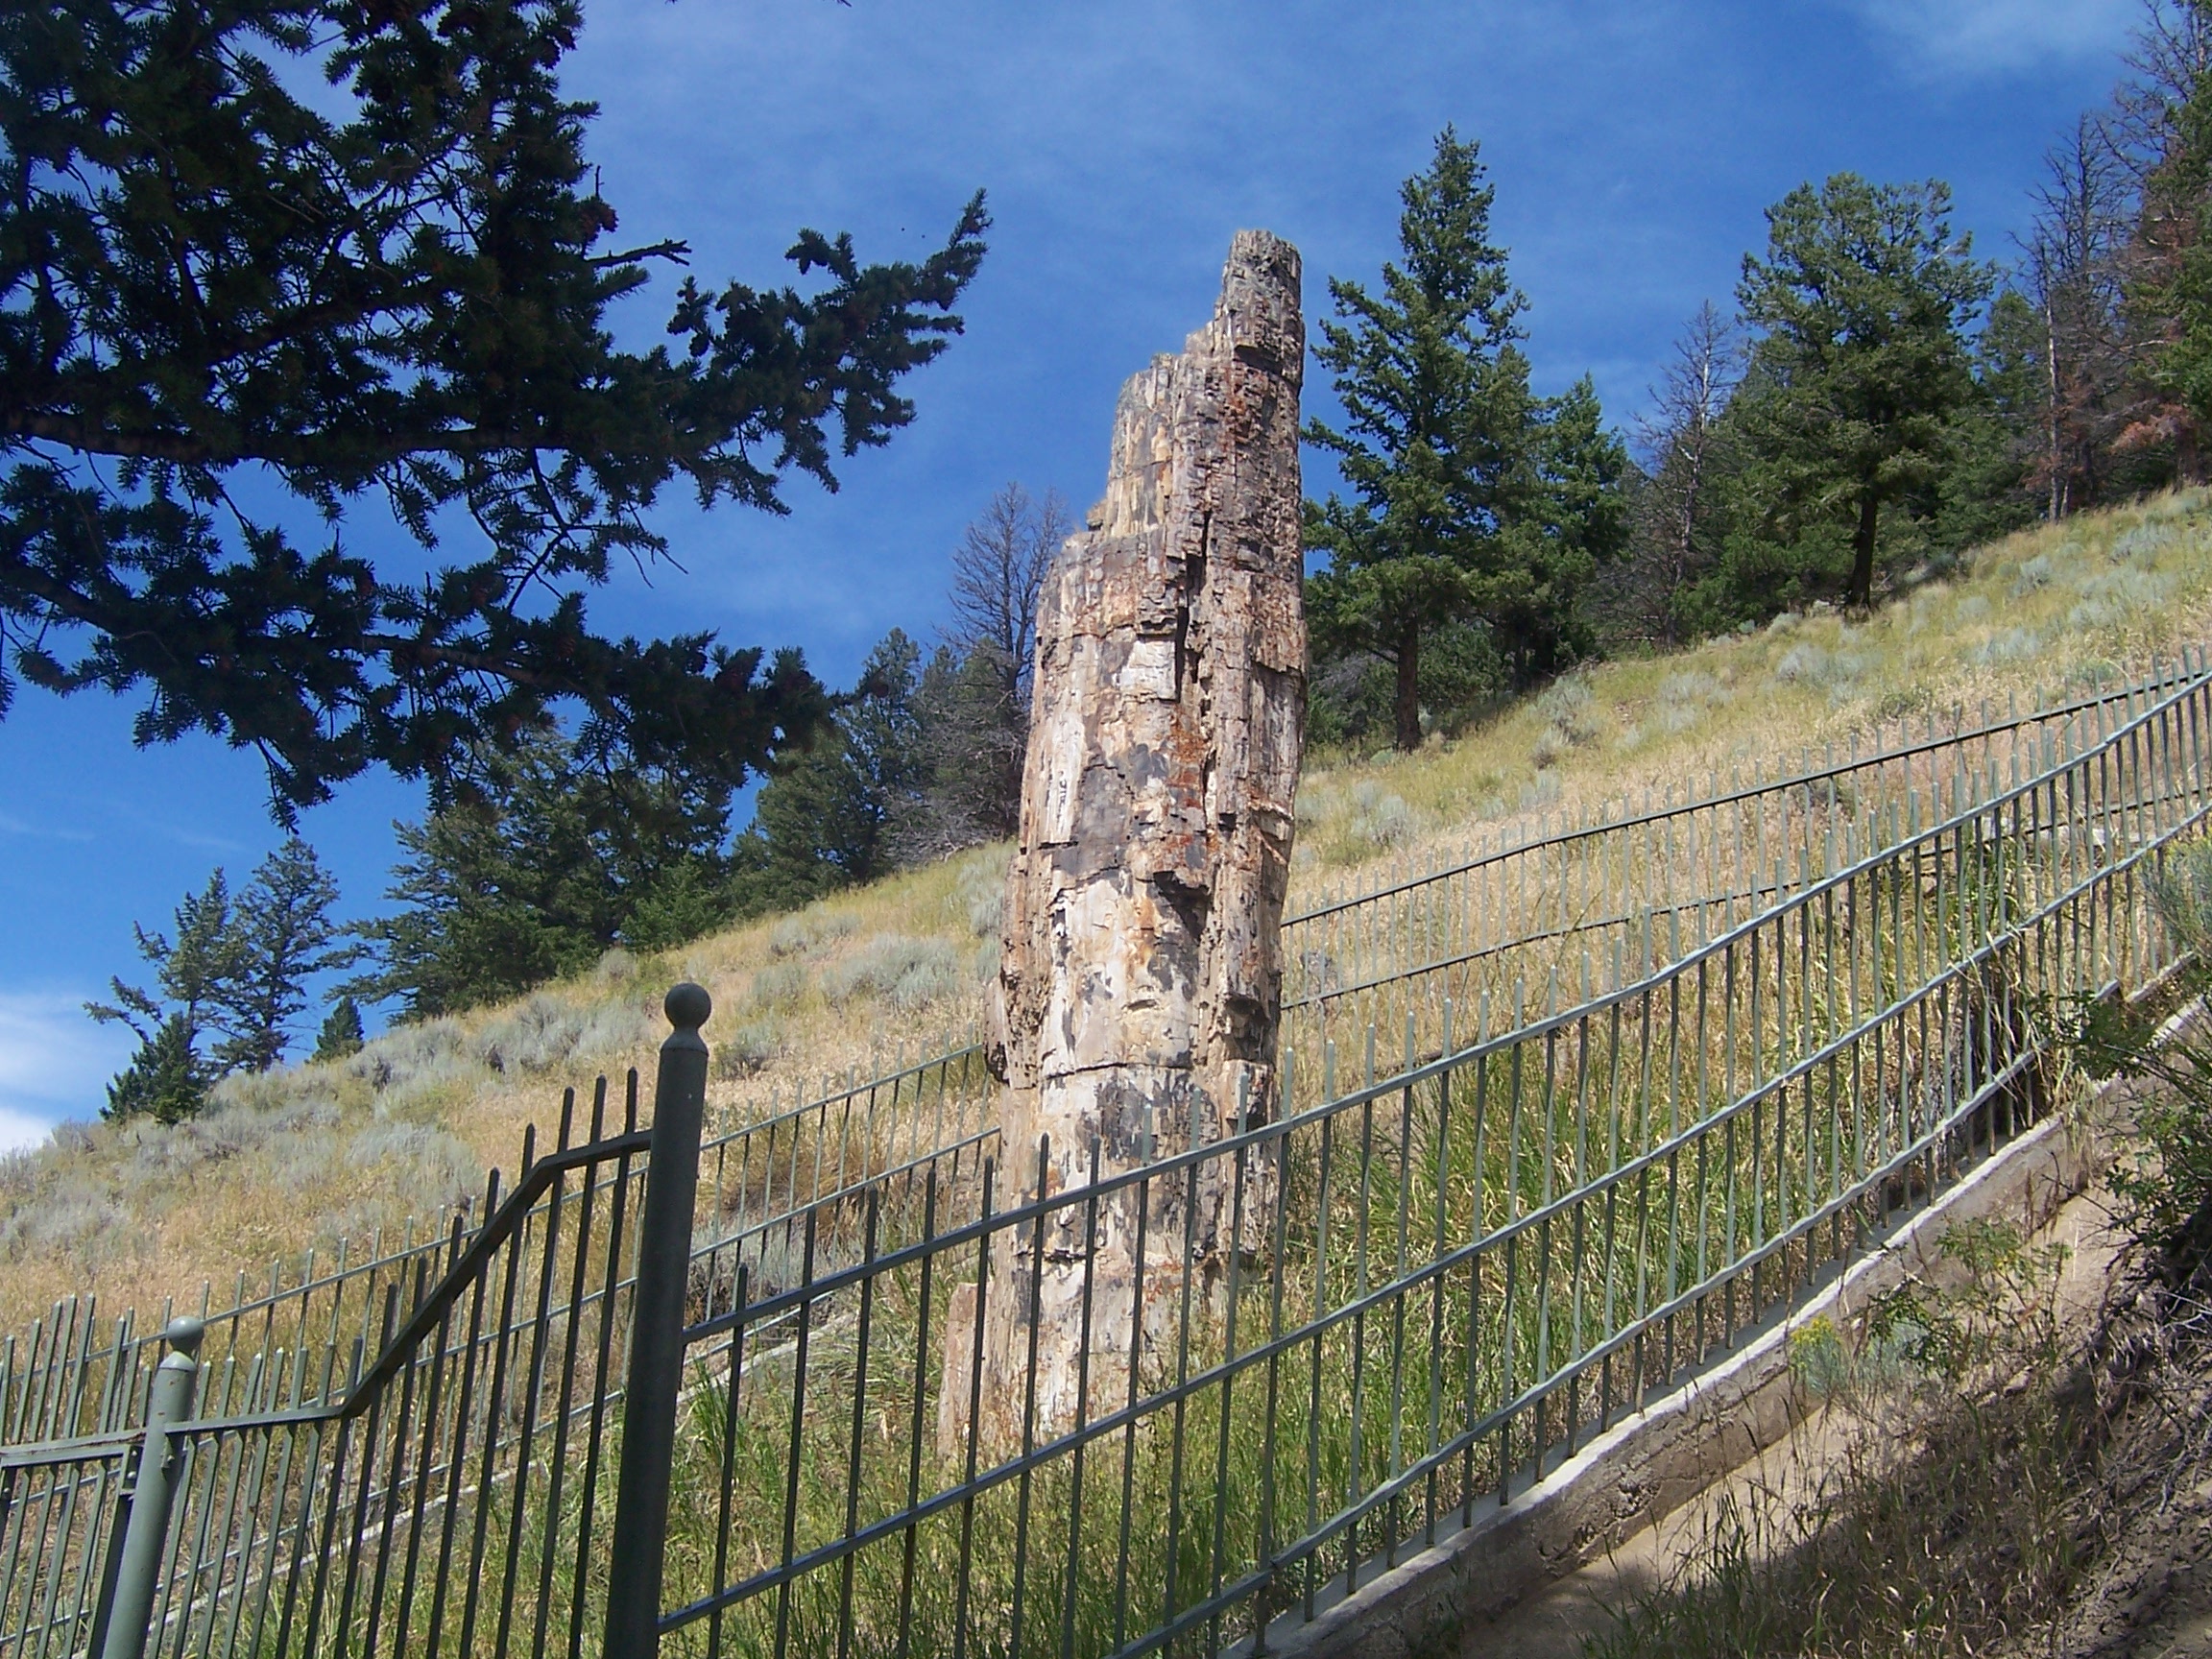 Petrified tree, a millions of year redwood fossil. Redwood needs mild weather, so the climate in yellowstone was once much warmer.